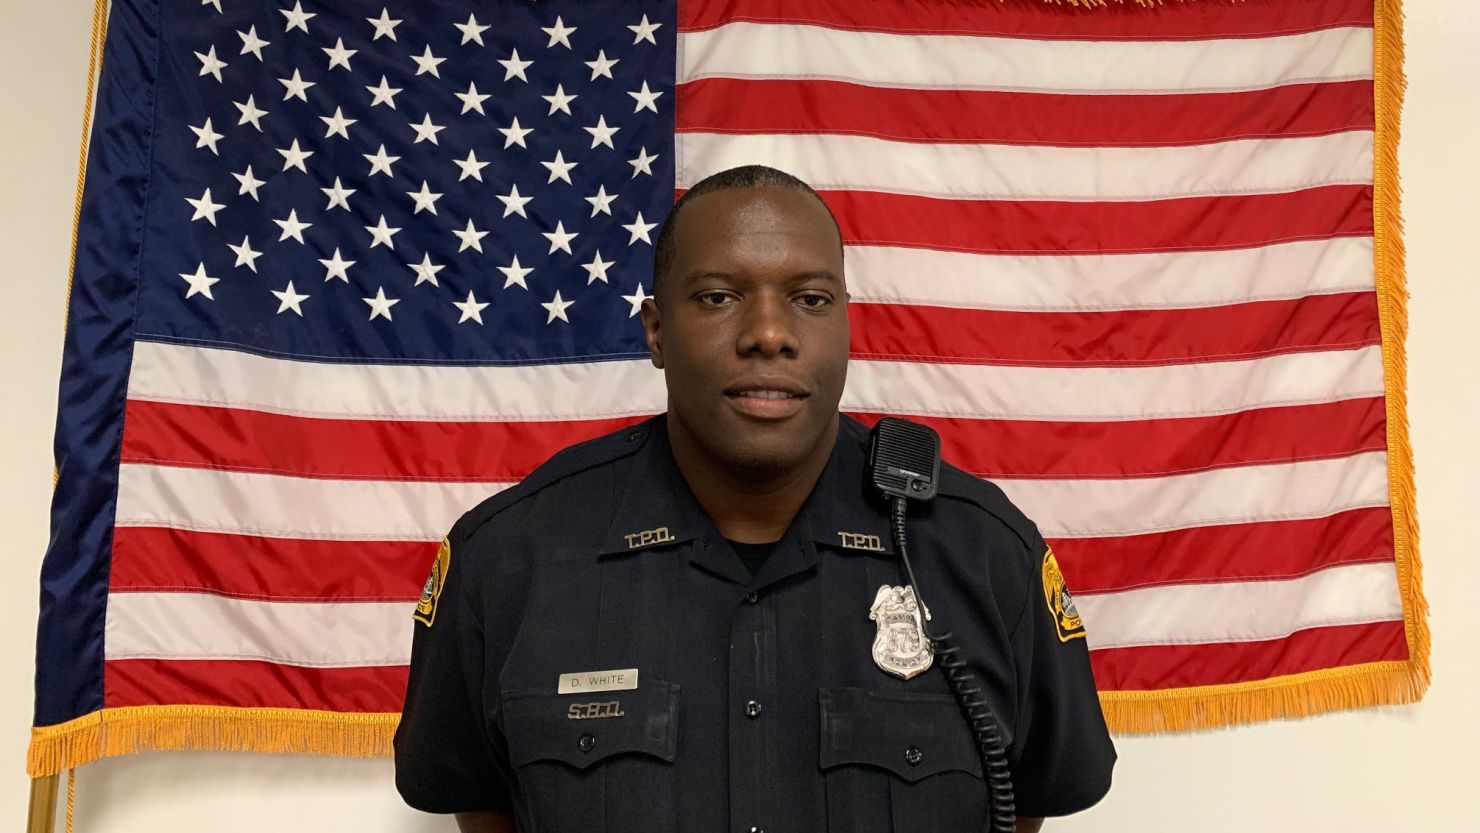 Officer Delvin White was fired this week from his job with the Tampa Police Department after he used the N-word in November.